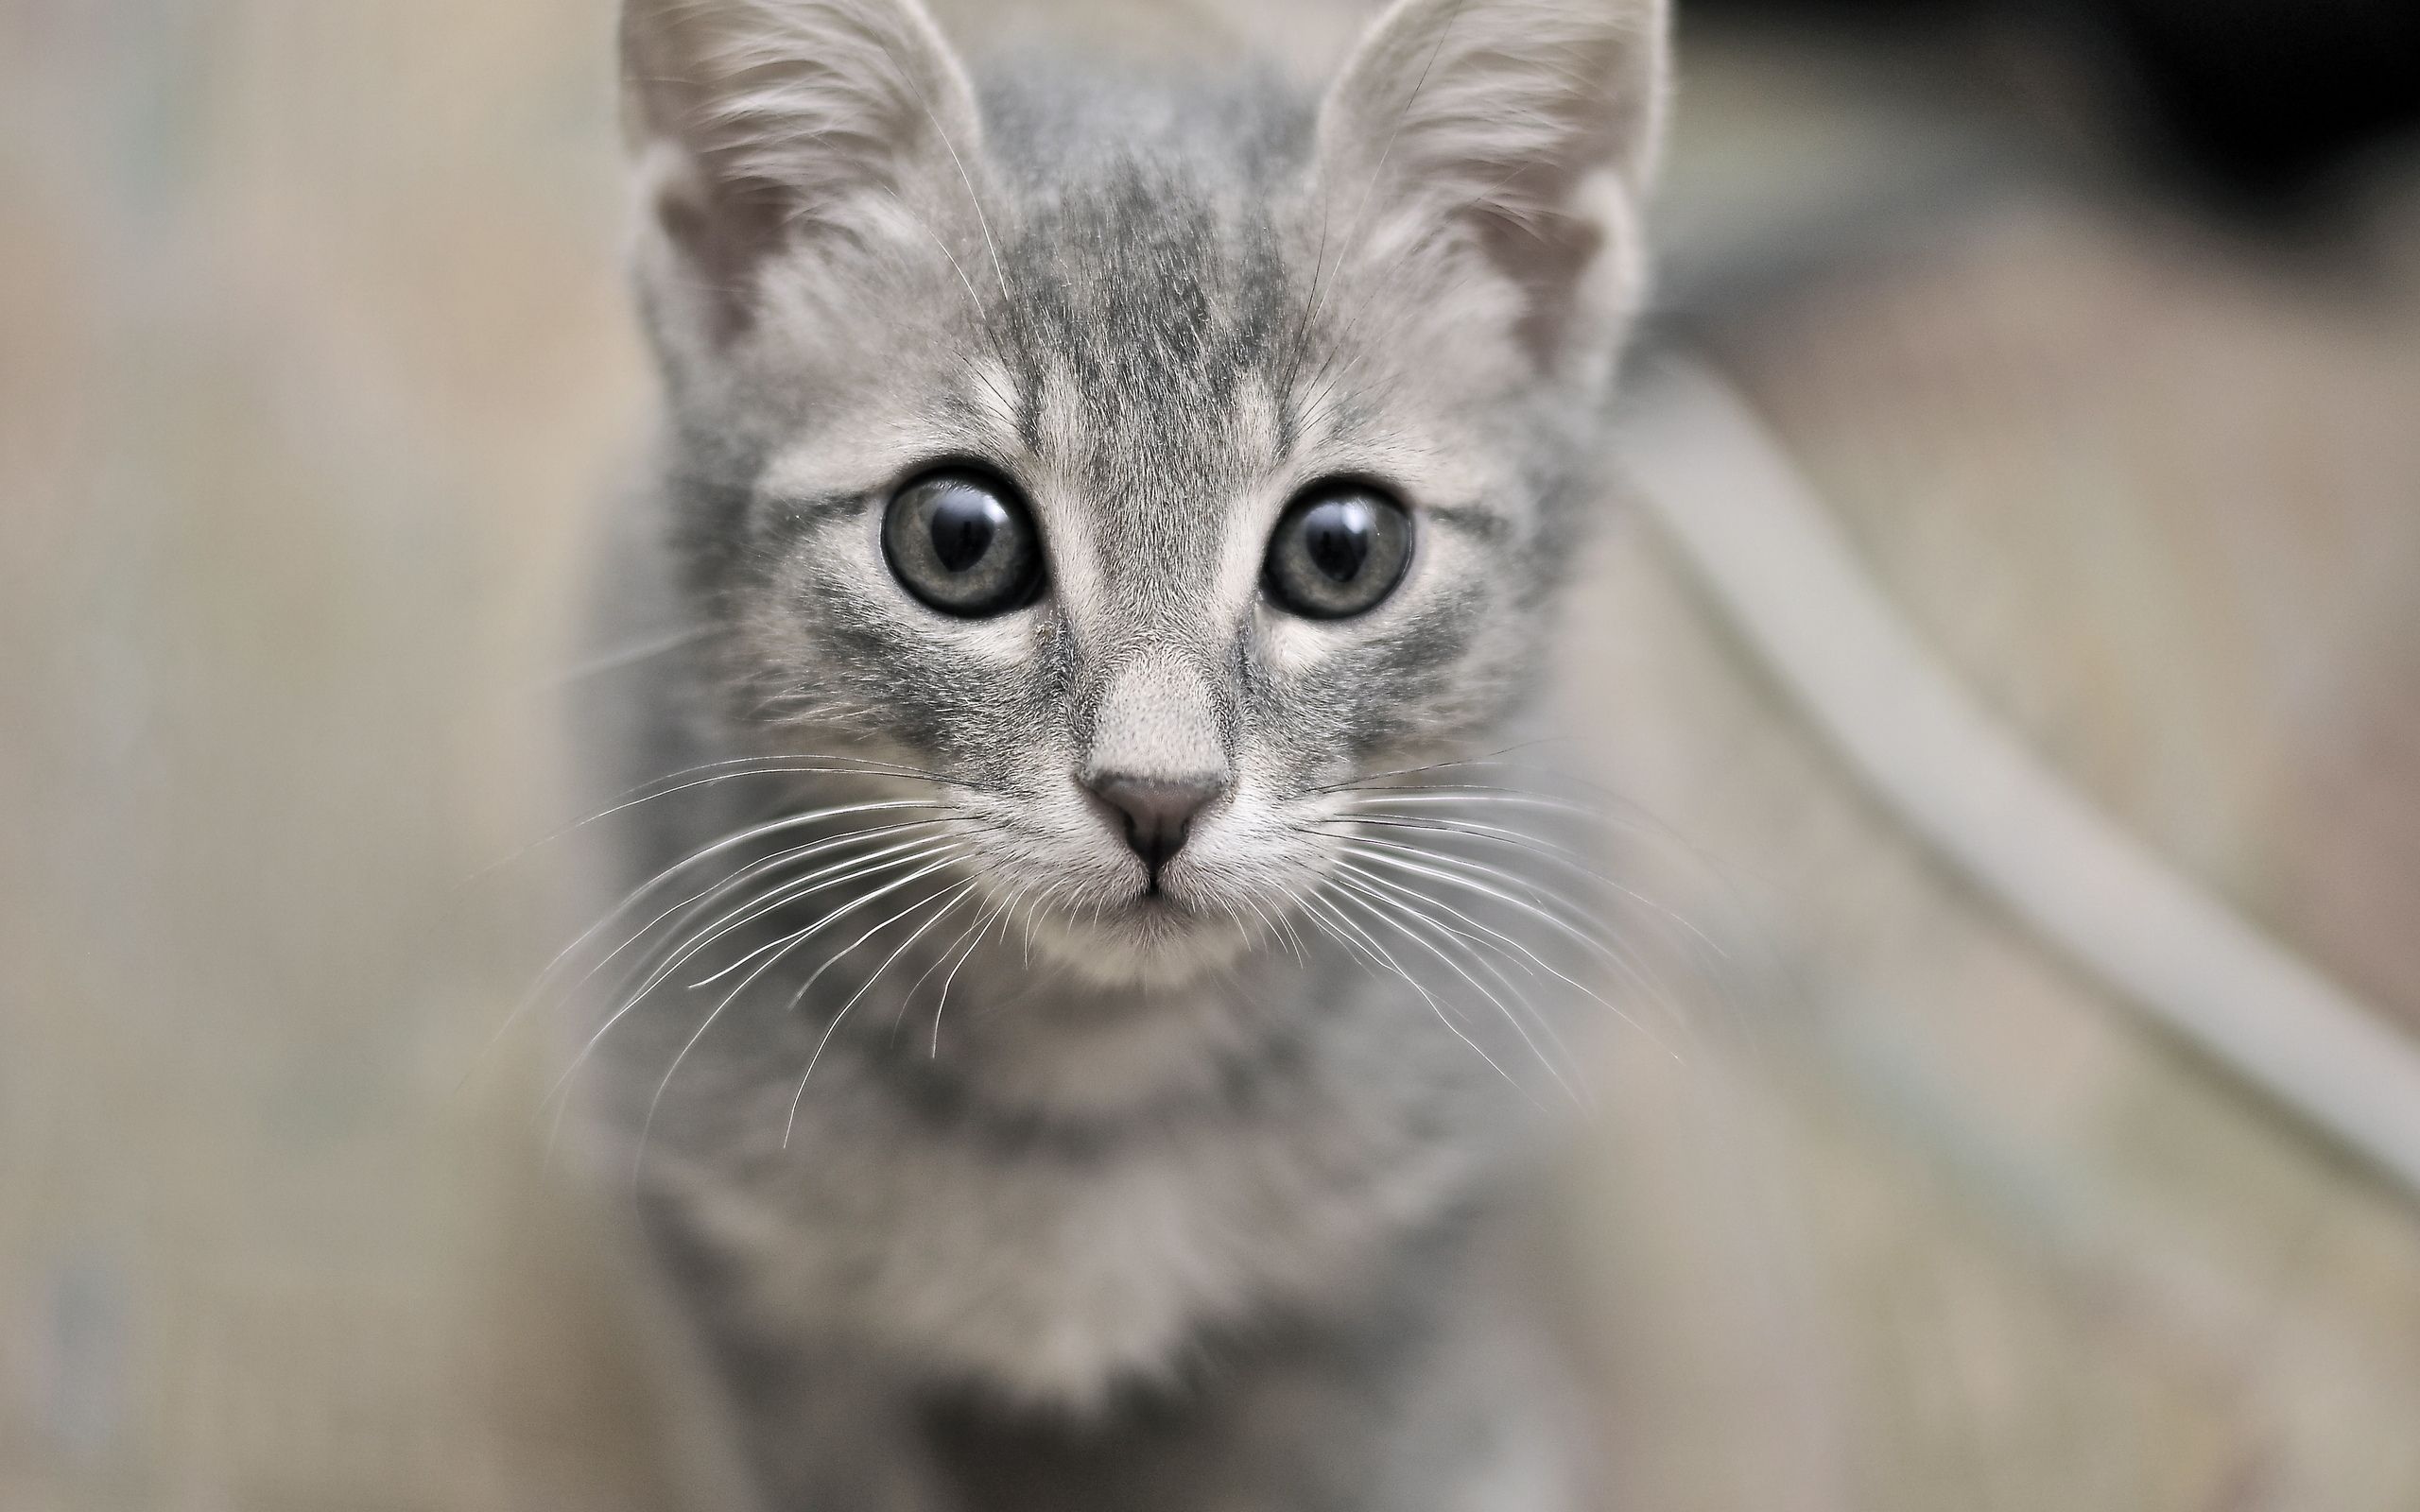 Cute gray cat with gray eyes wallpaper and image, picture, photo